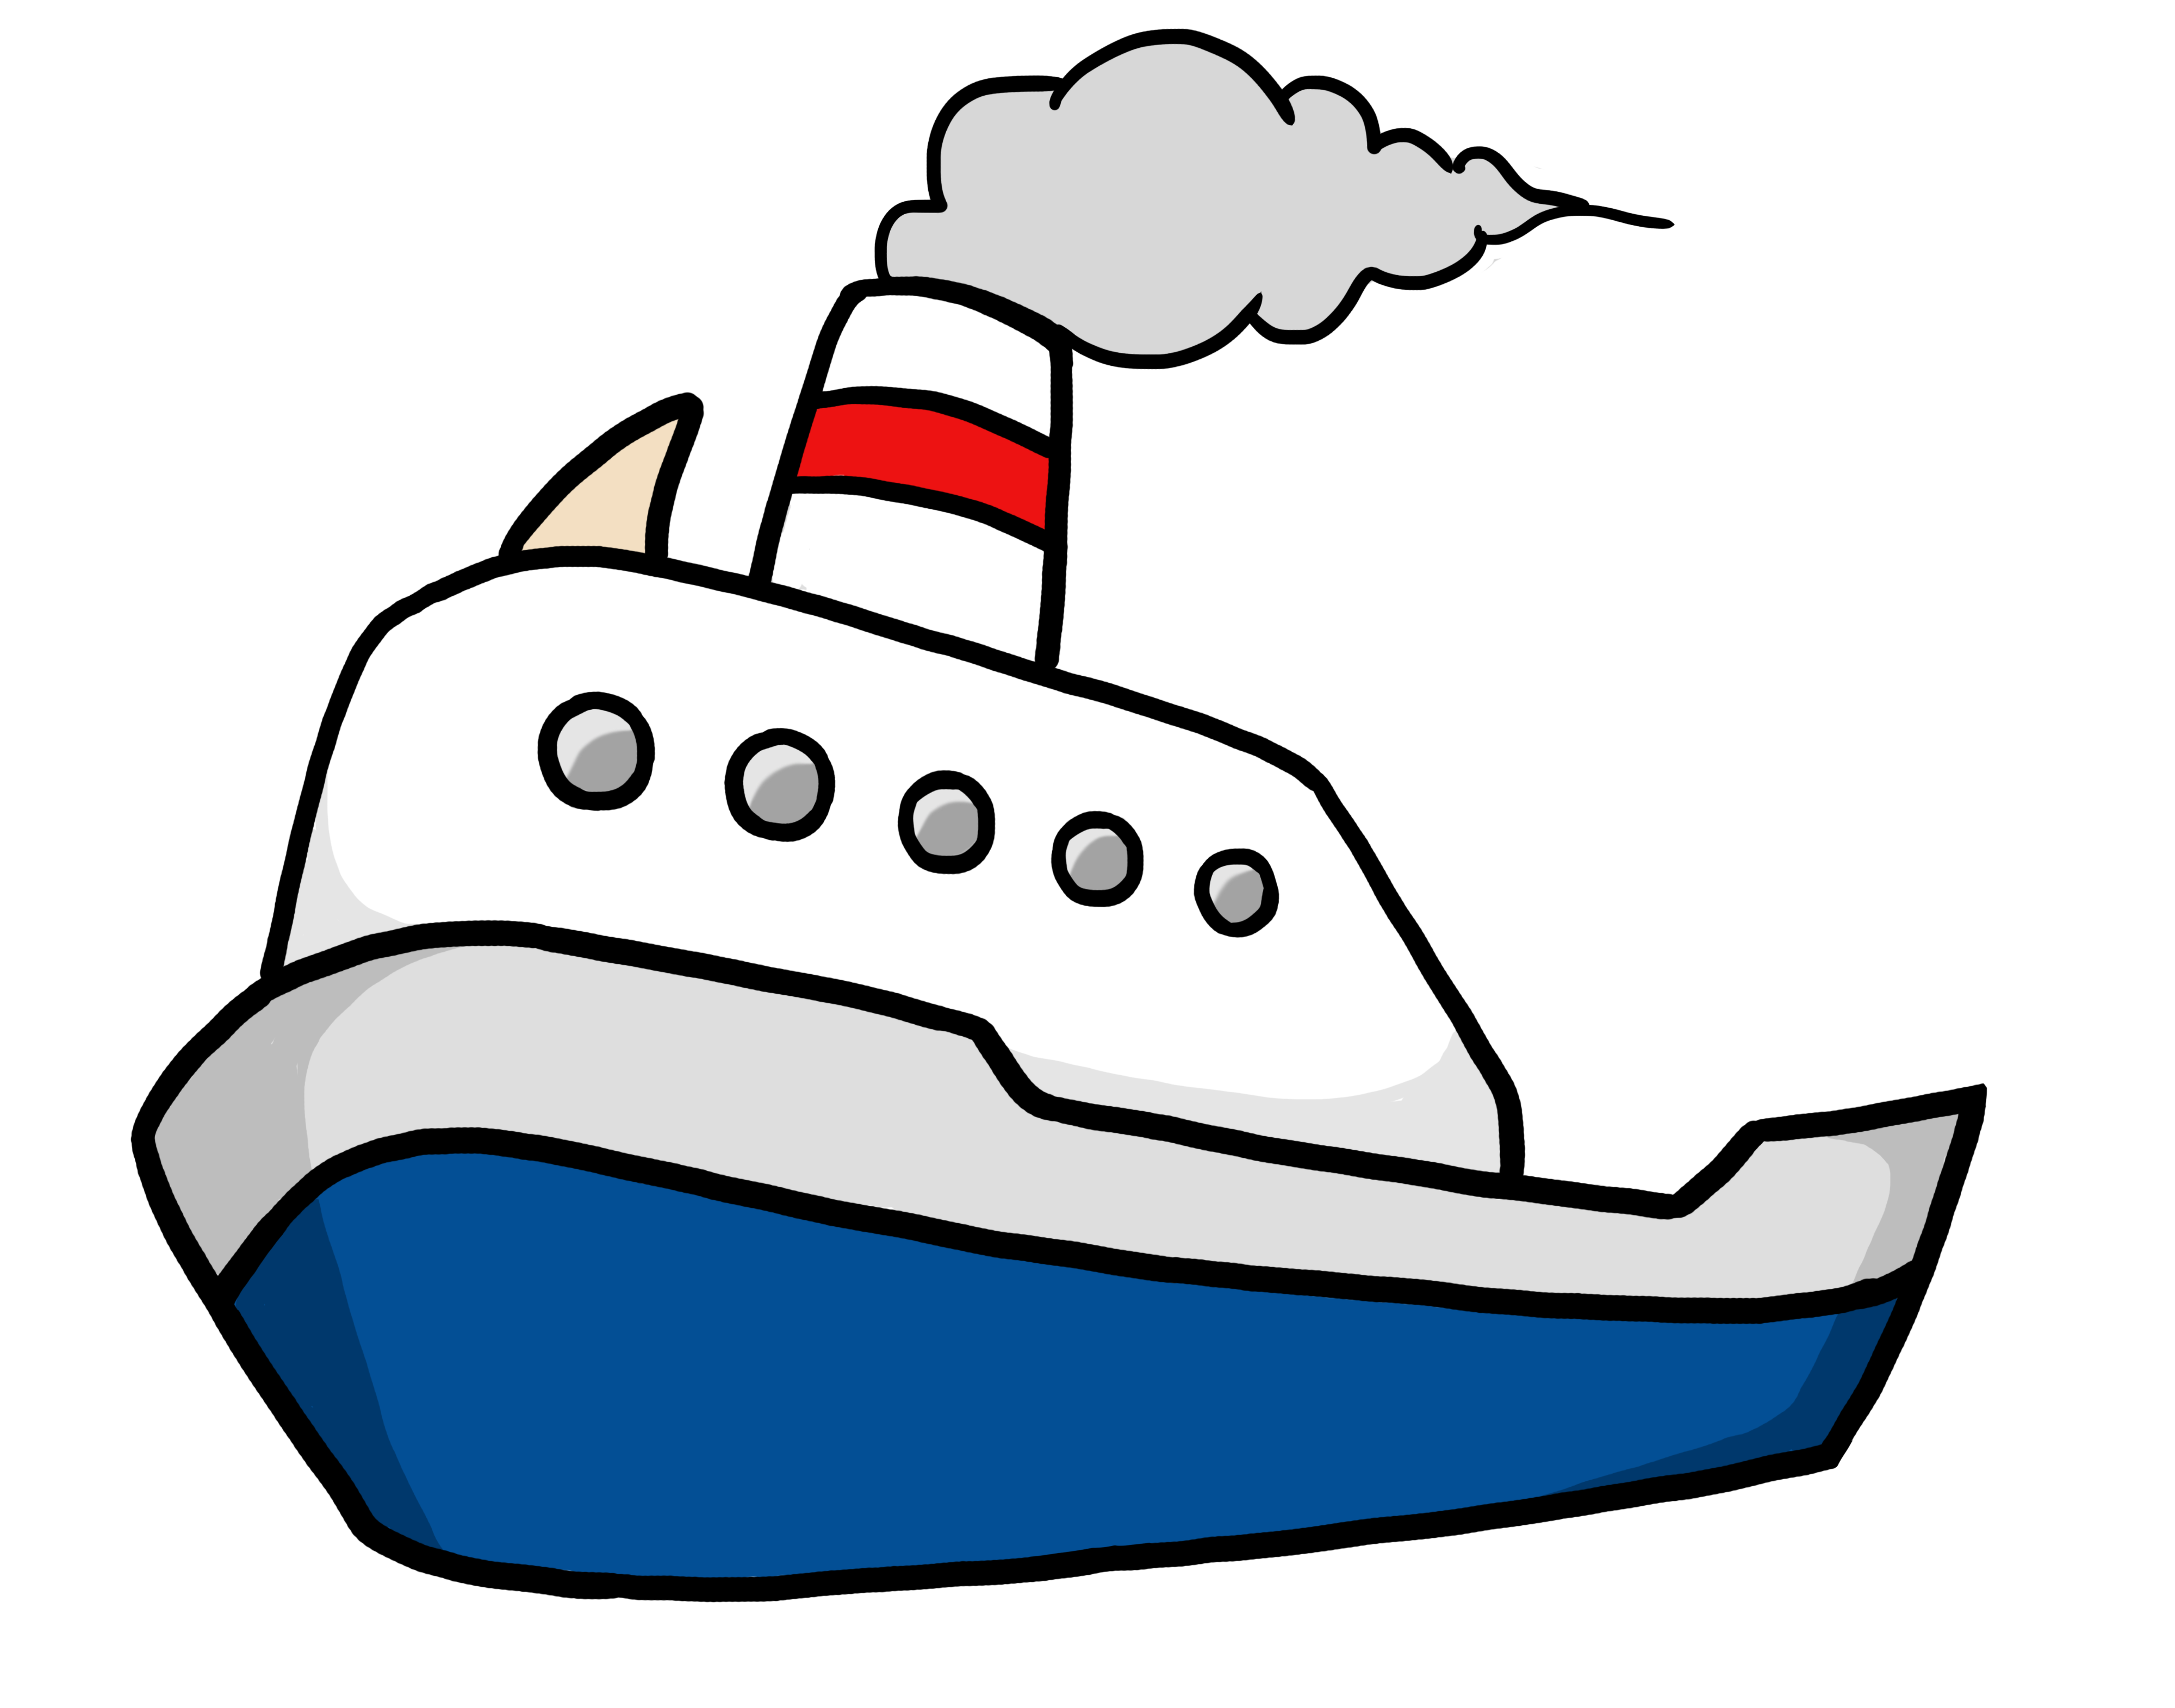 boat racing clipart - photo #34